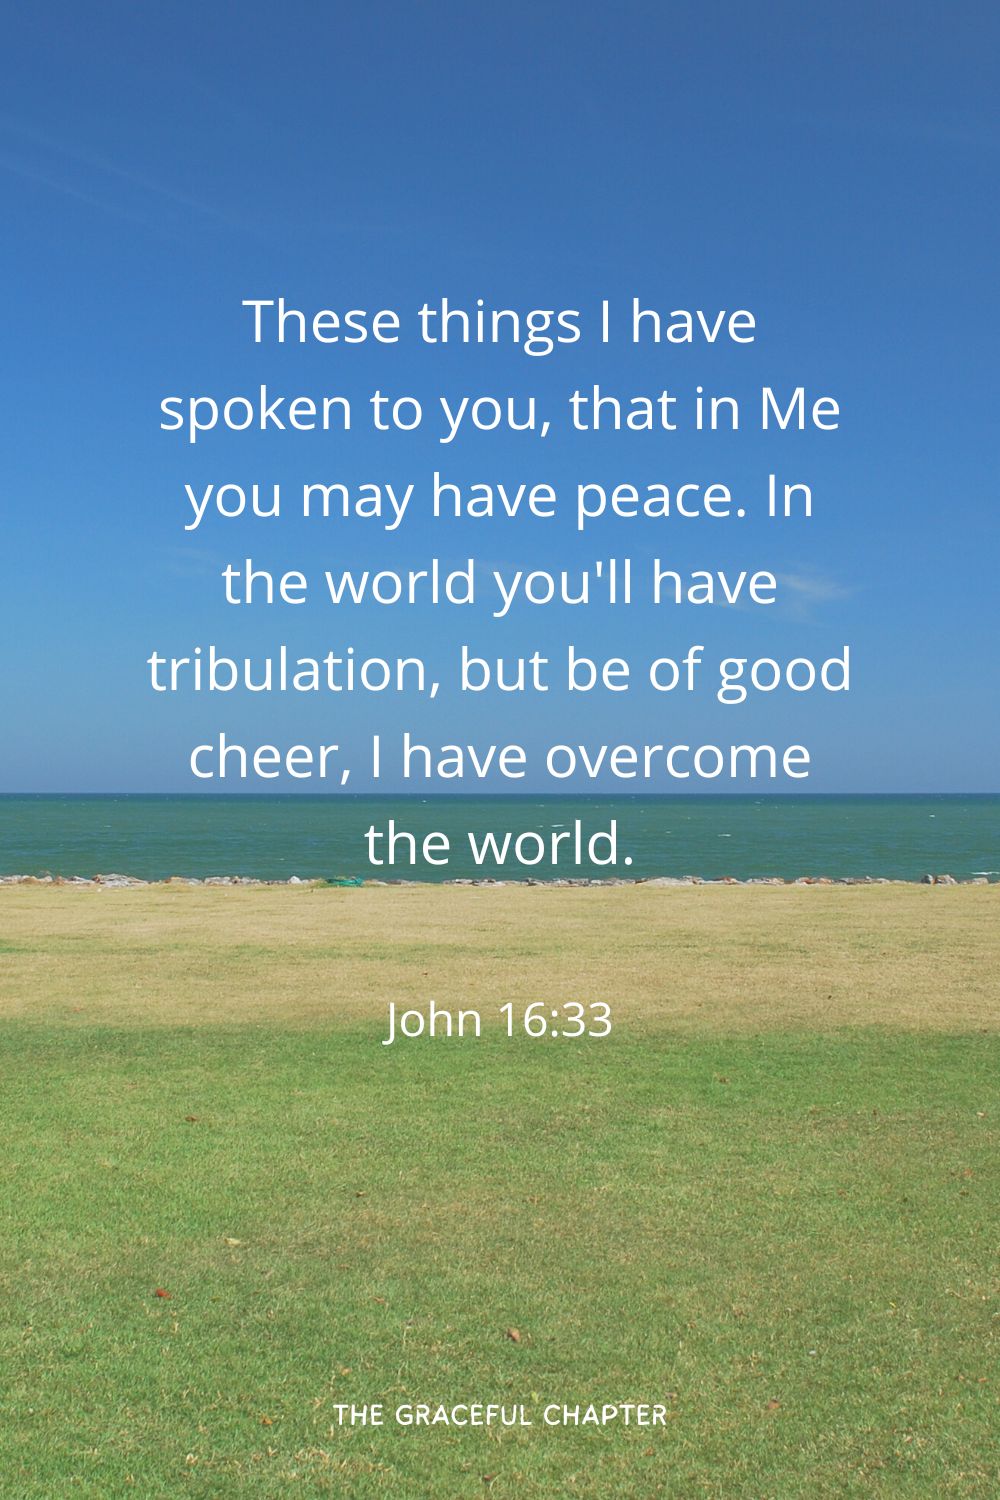 These things I have spoken to you, that in Me you may have peace. In the world you'll have tribulation, but be of good cheer, I have overcome the world.